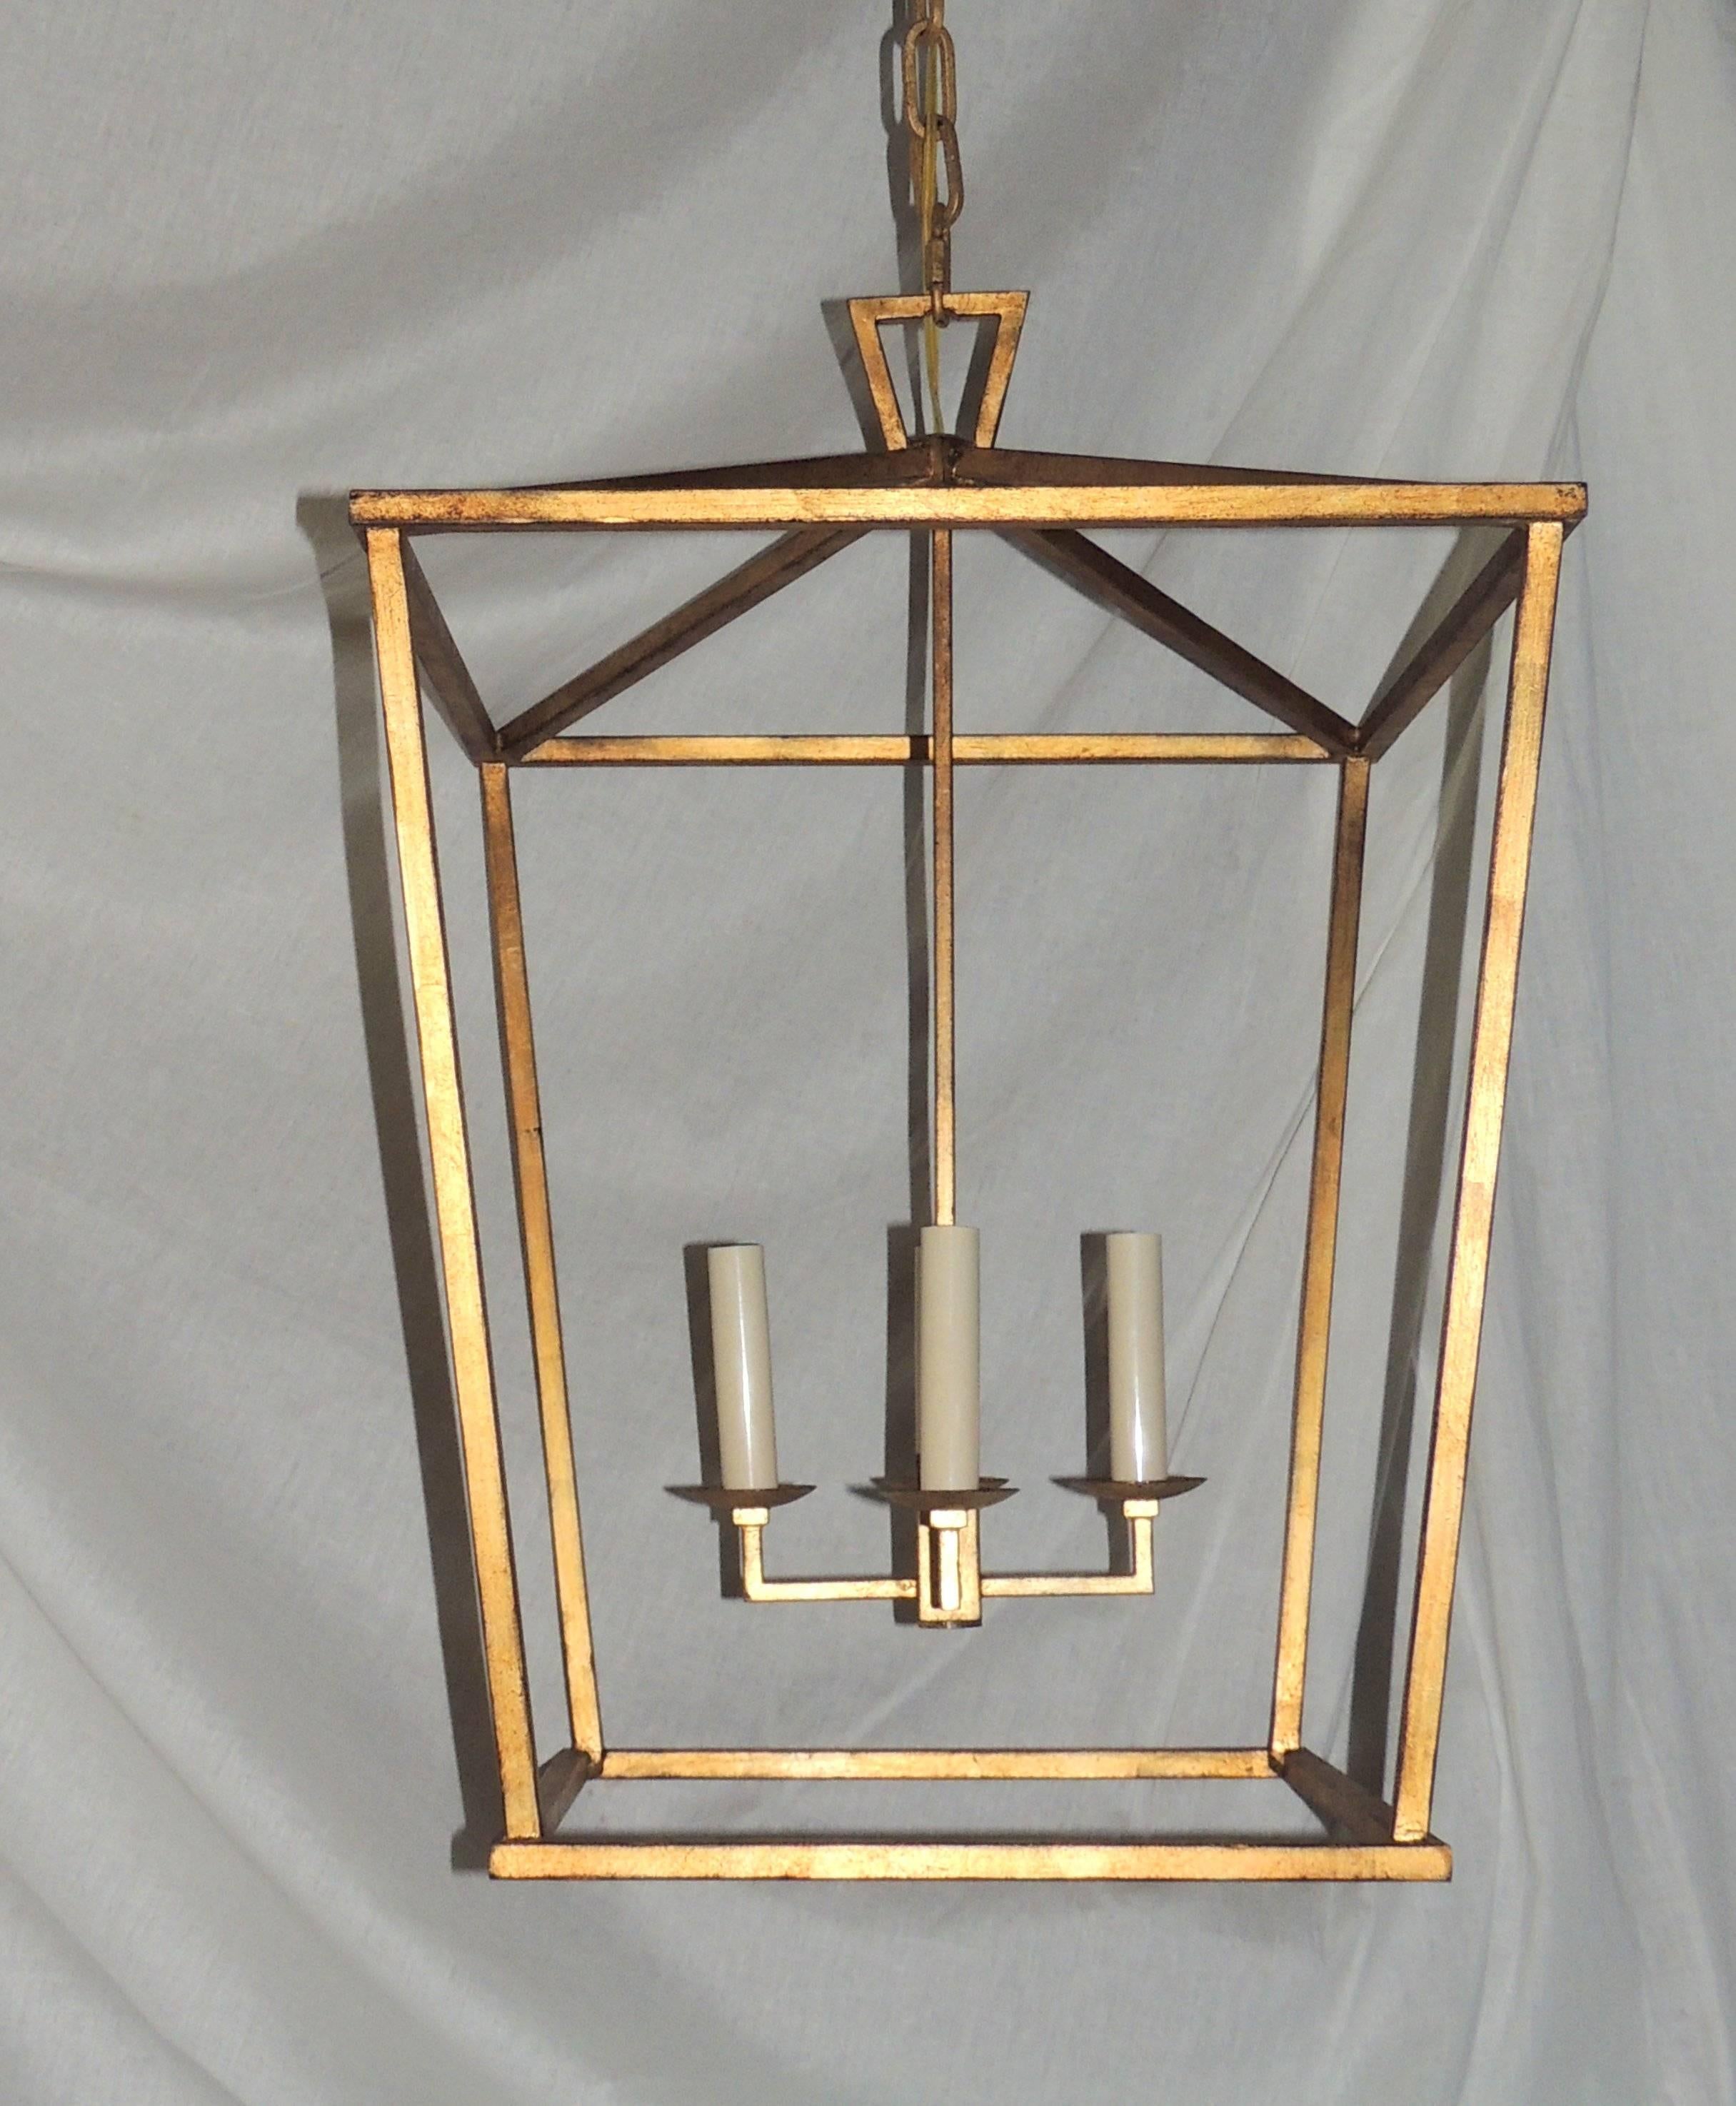 Wonderful set of three open sided large lanterns with four arms and peaked top.

Perfect in the modern transitional space.

Measures: 16.75" W x 16.75" D x 24.5" H.

Lower measurement: 13" x 13".

Sold separately or